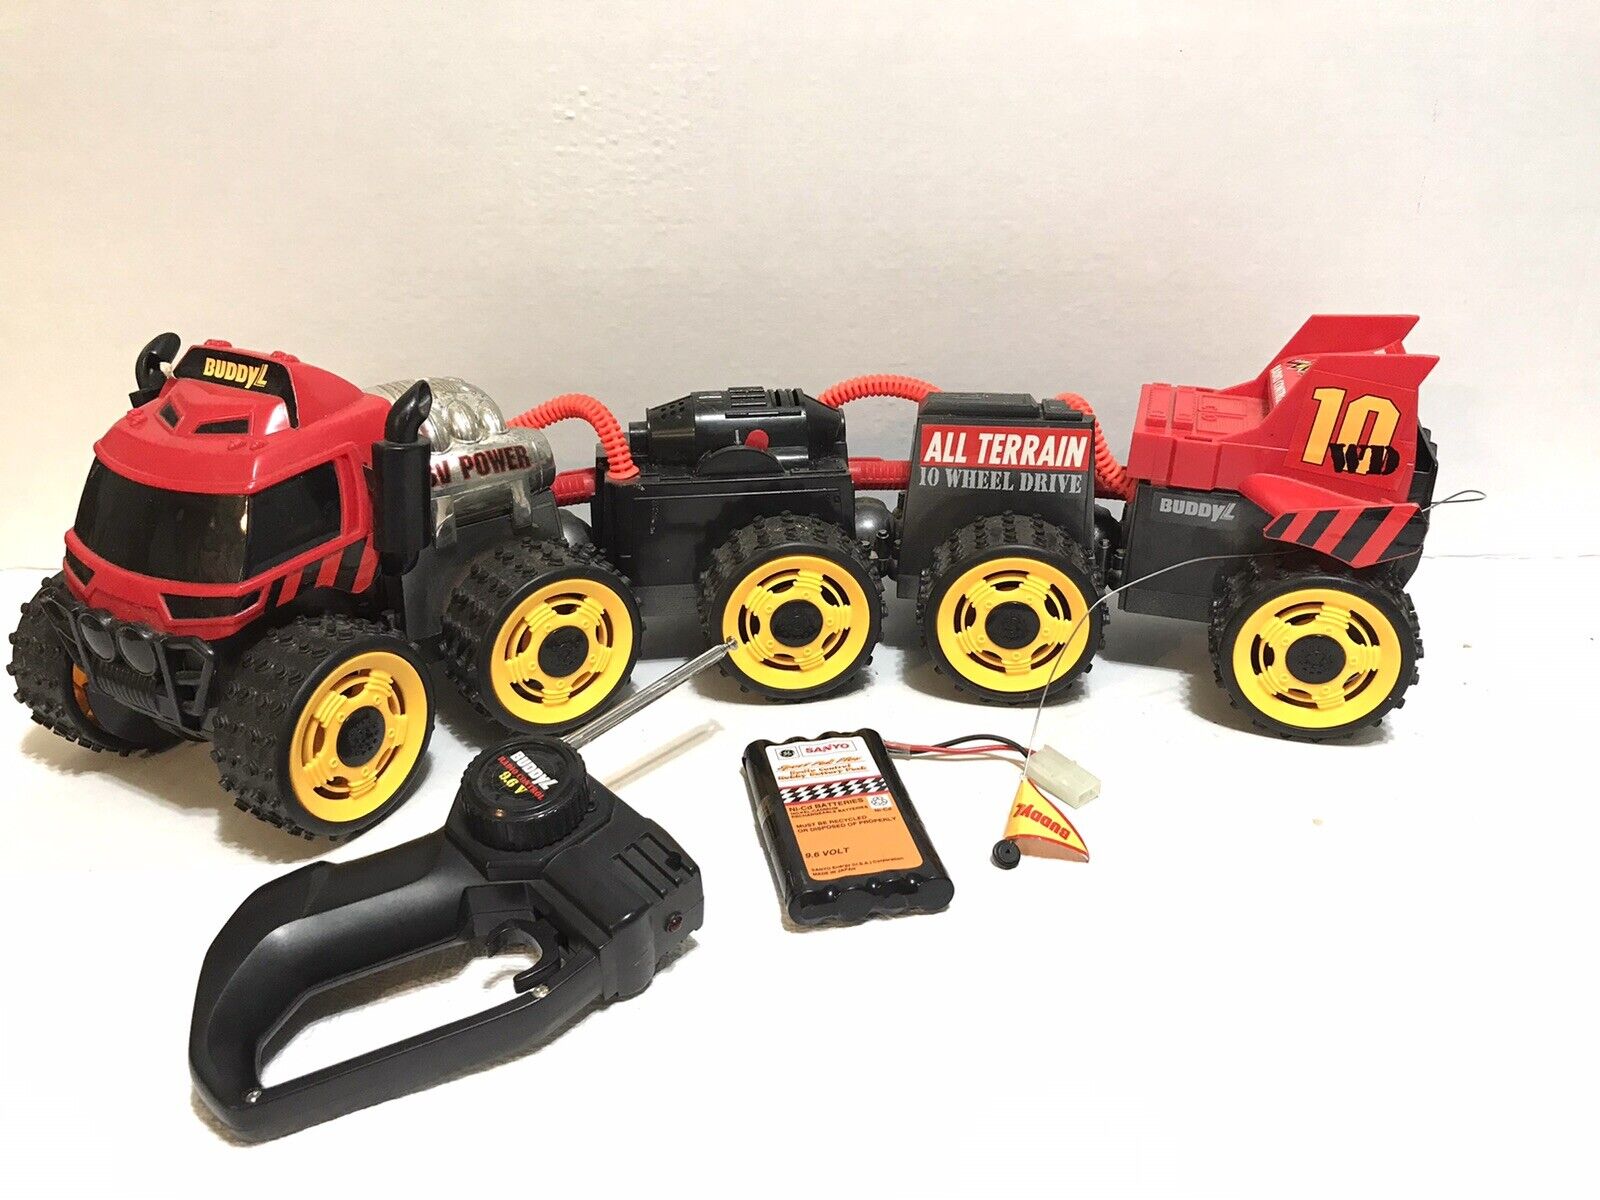 Buddy L Rattler 10 Wheel Remote Control Truck, 1994, Battery Not Included